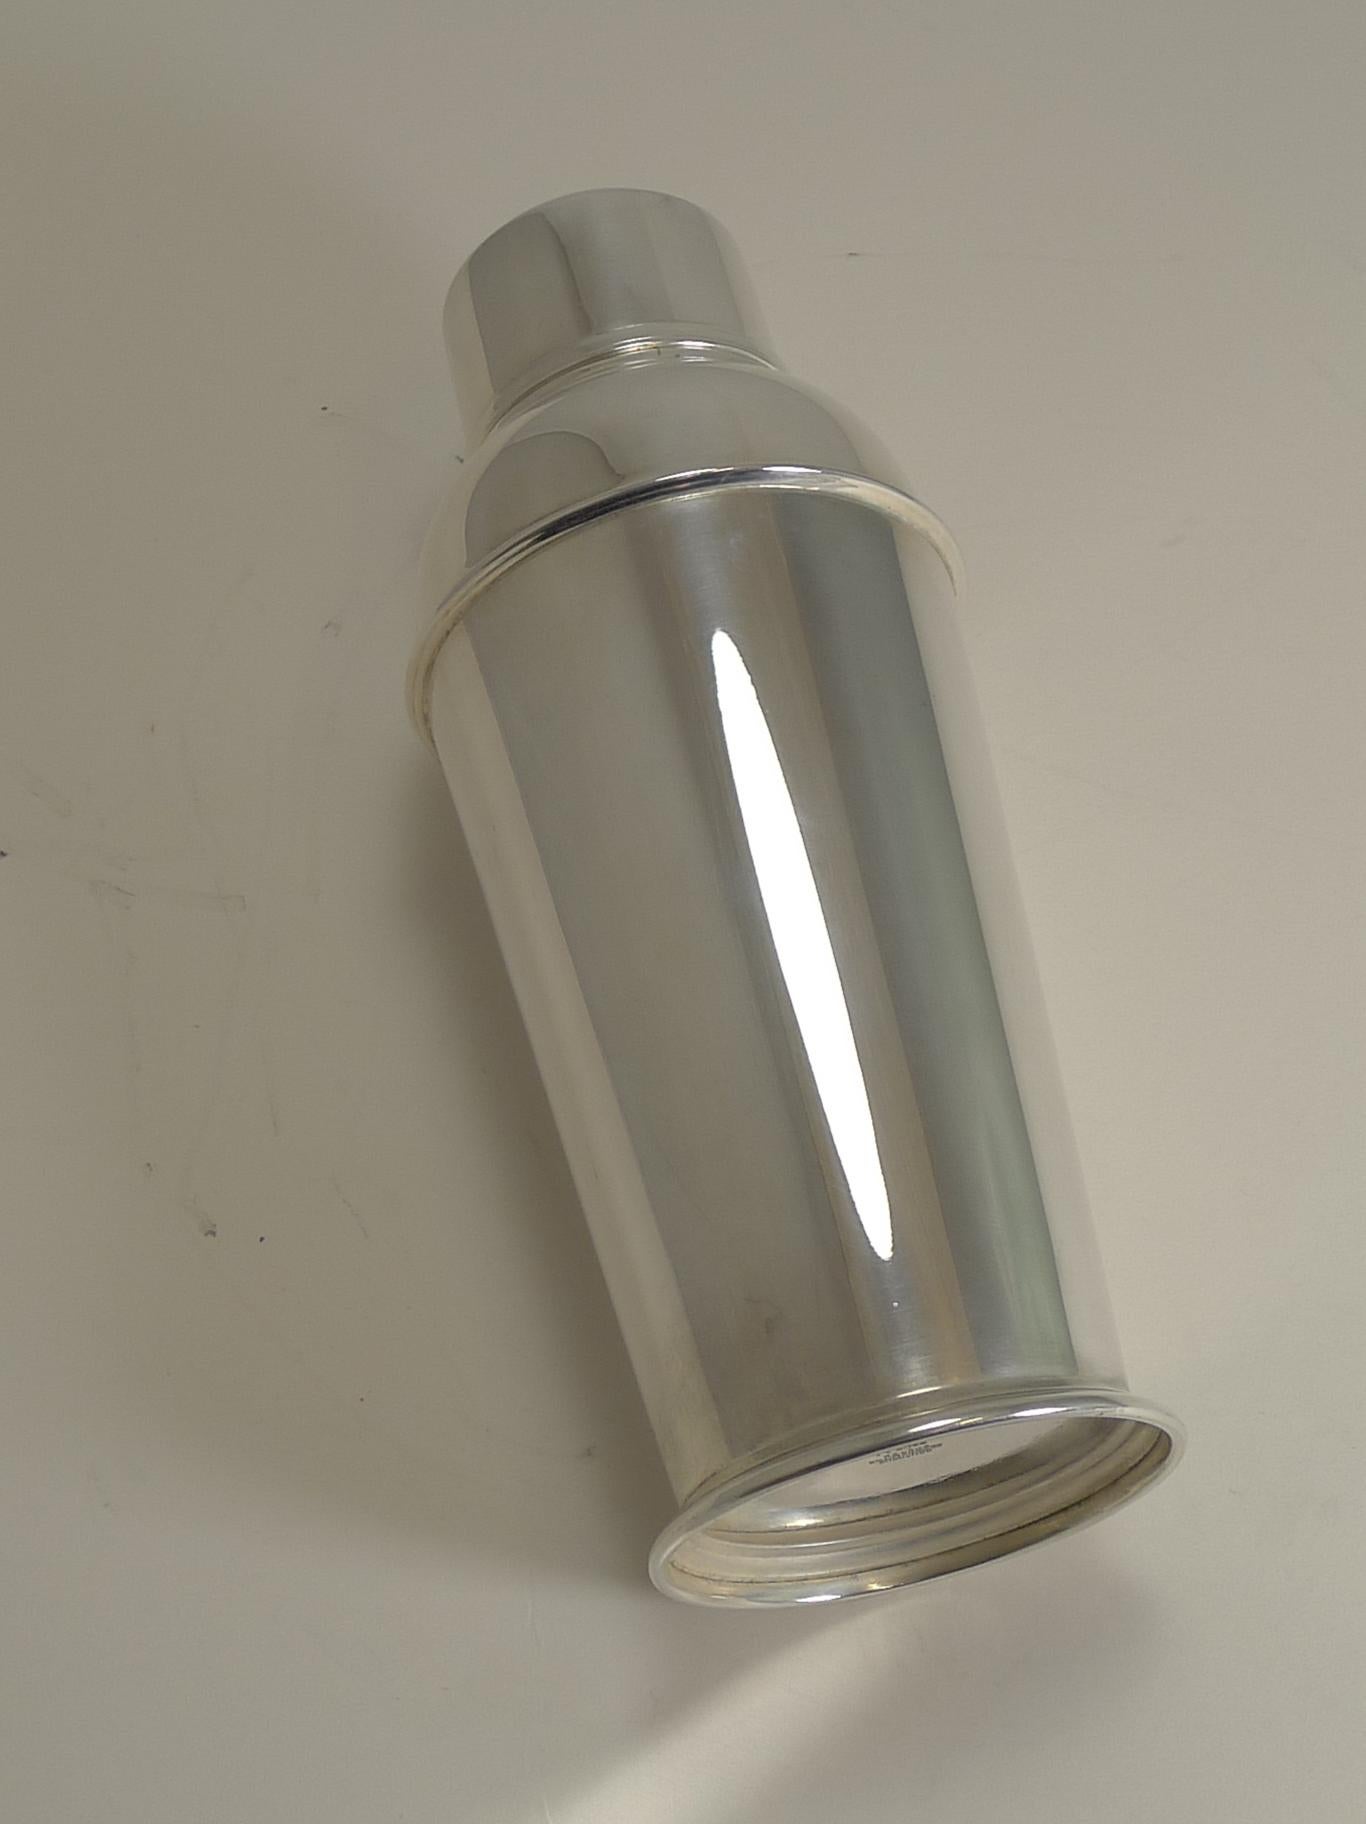 A fabulous Art Deco cocktail shaker made from silver plate and signed on the underside Brufords of Exeter, a silversmith's in the West Country that survived 115 years in business.

This example has a removable strainer, used once the ingredients